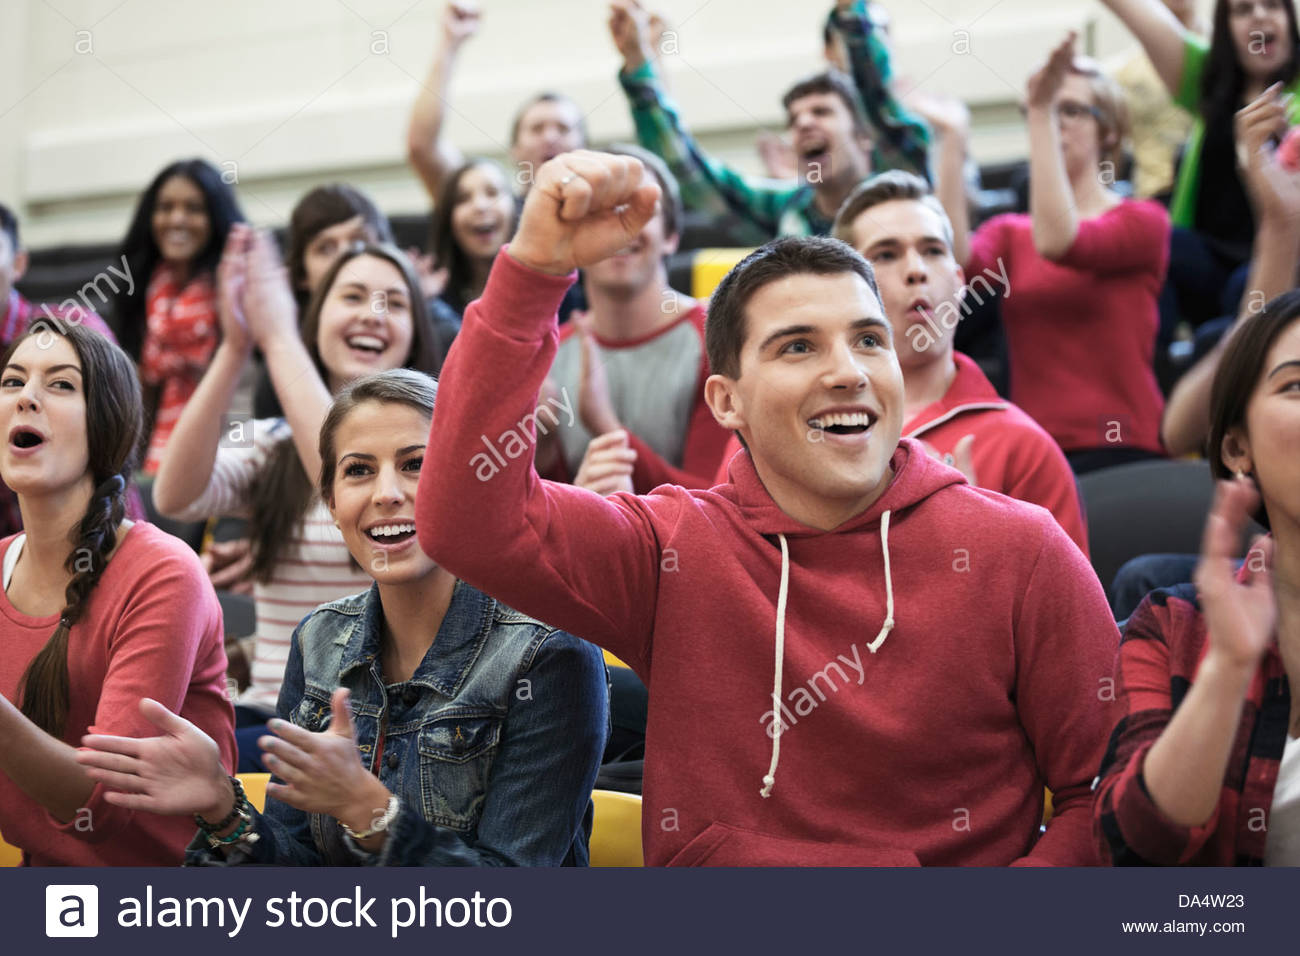 Grand groupe d'élèves cheering at college sporting event Banque D'Images